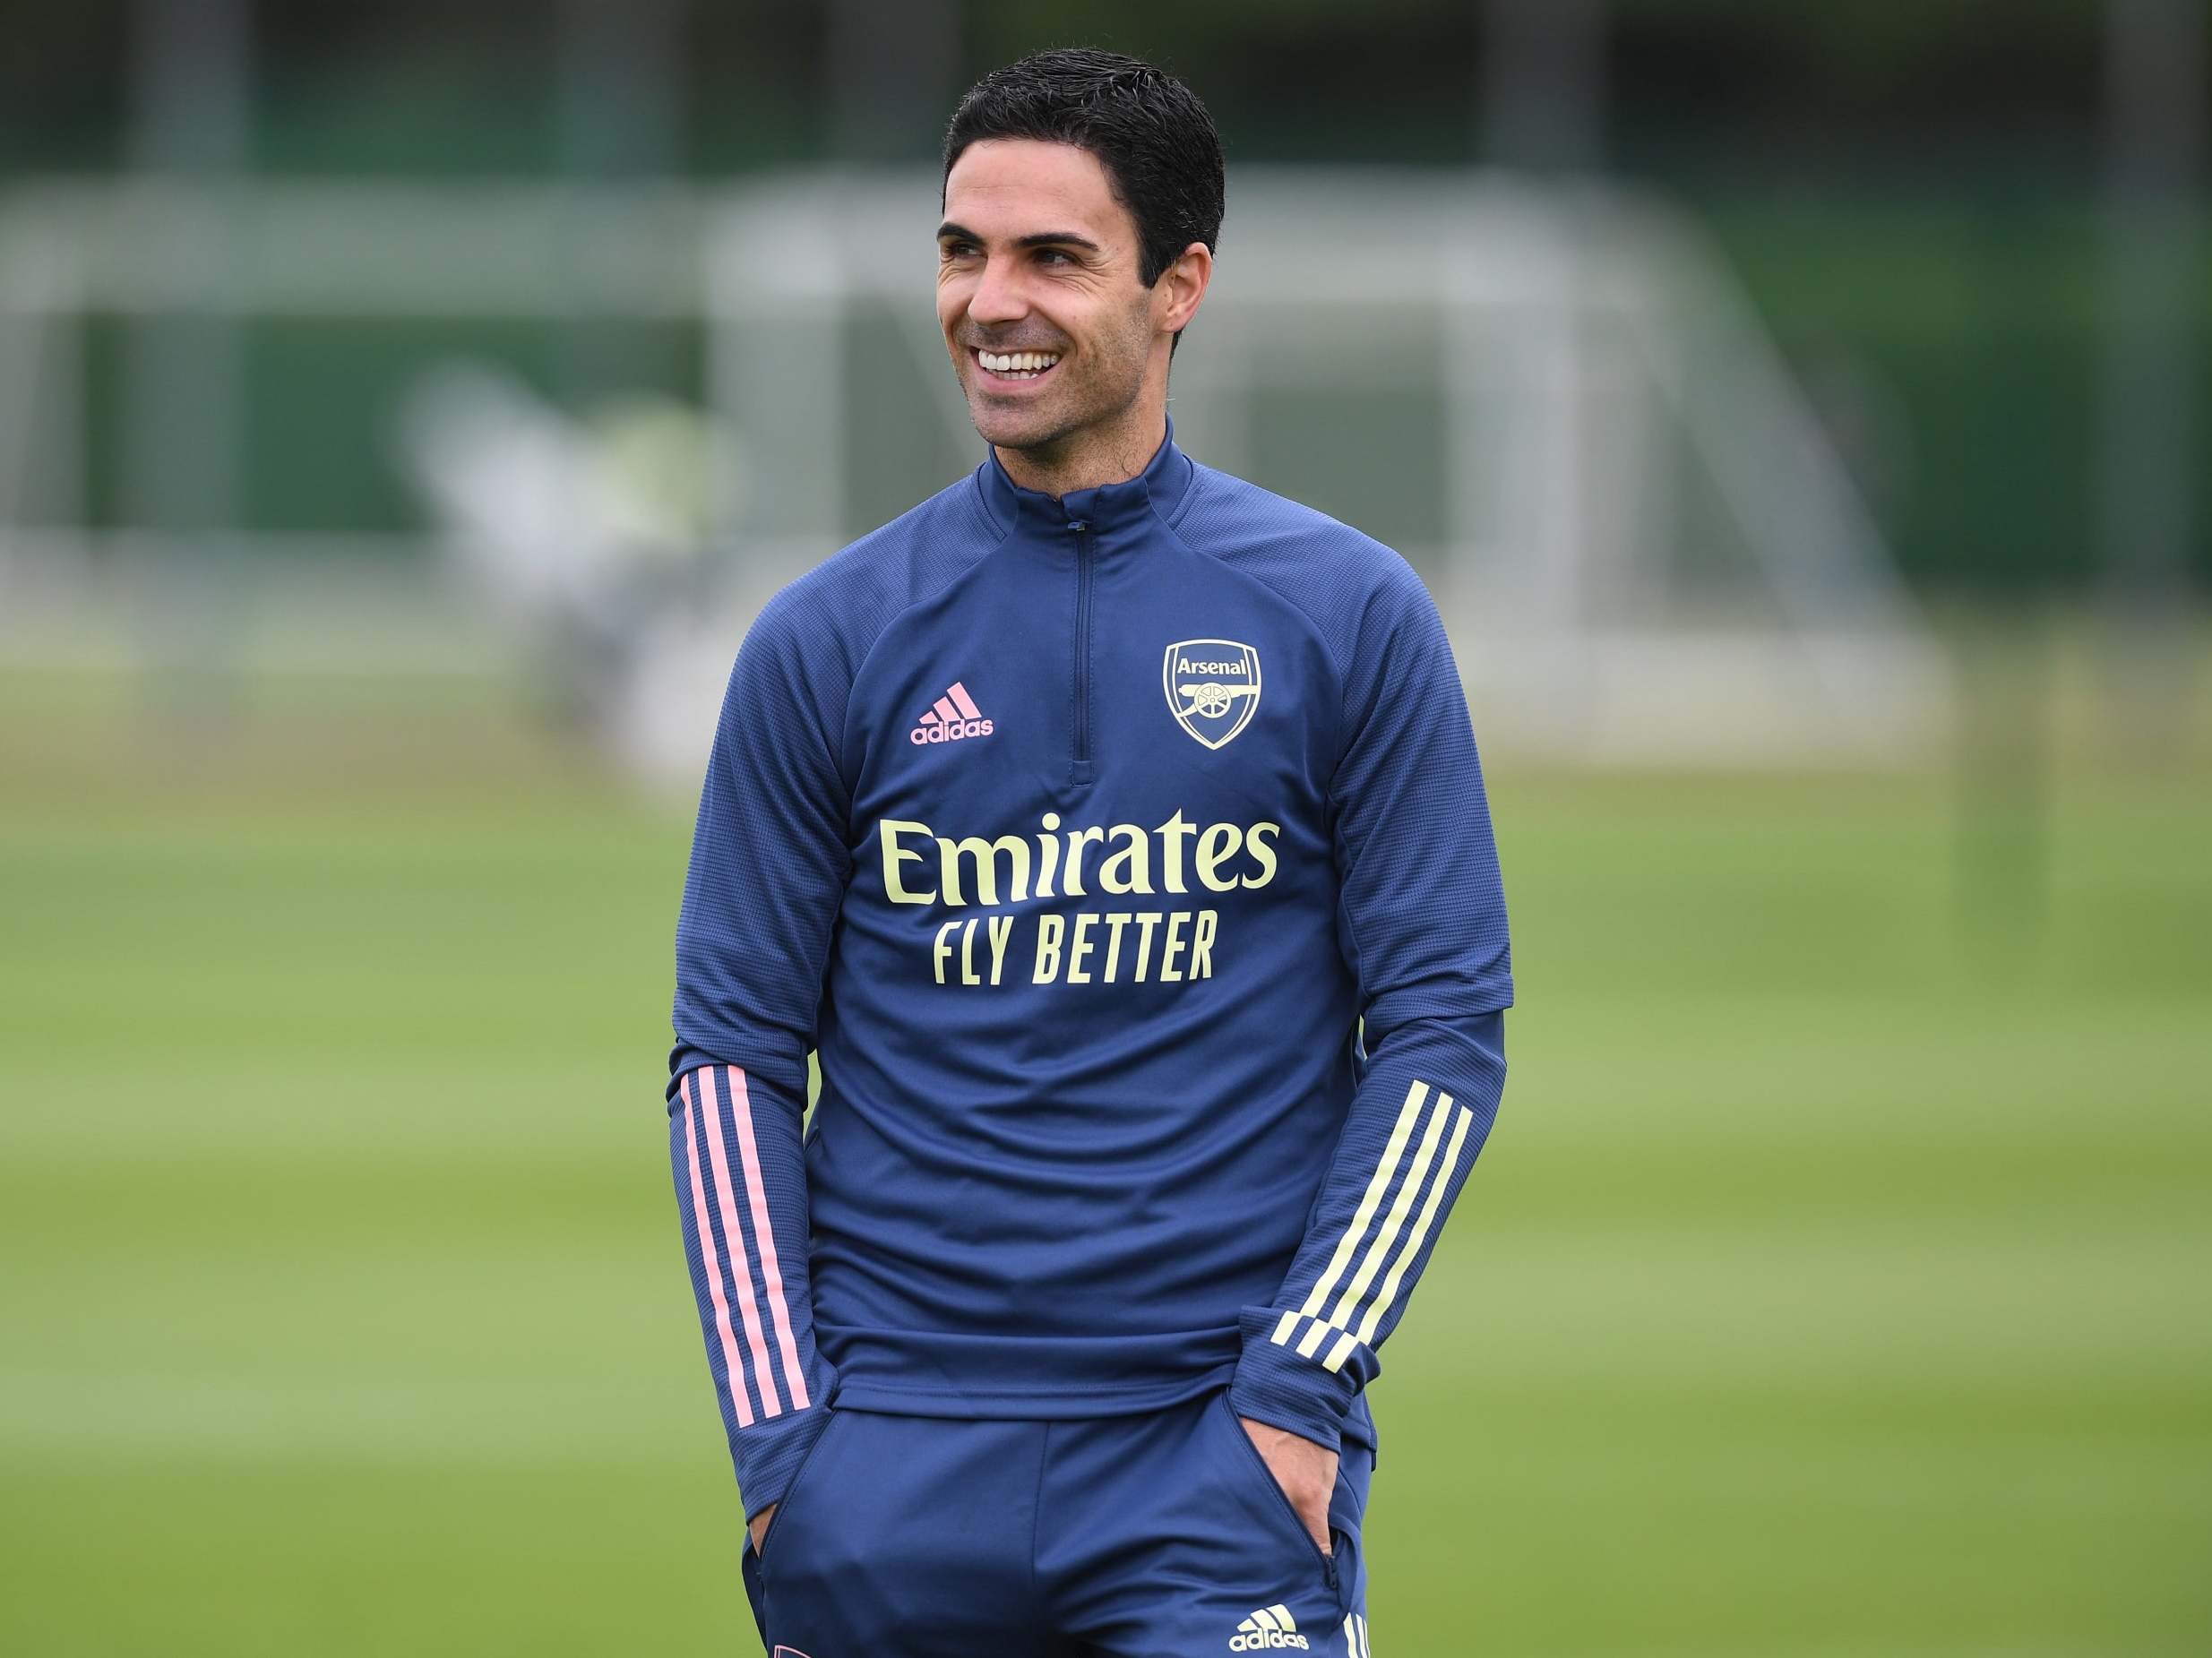 Arteta is aware that pushing for the Champions League will come at a risk